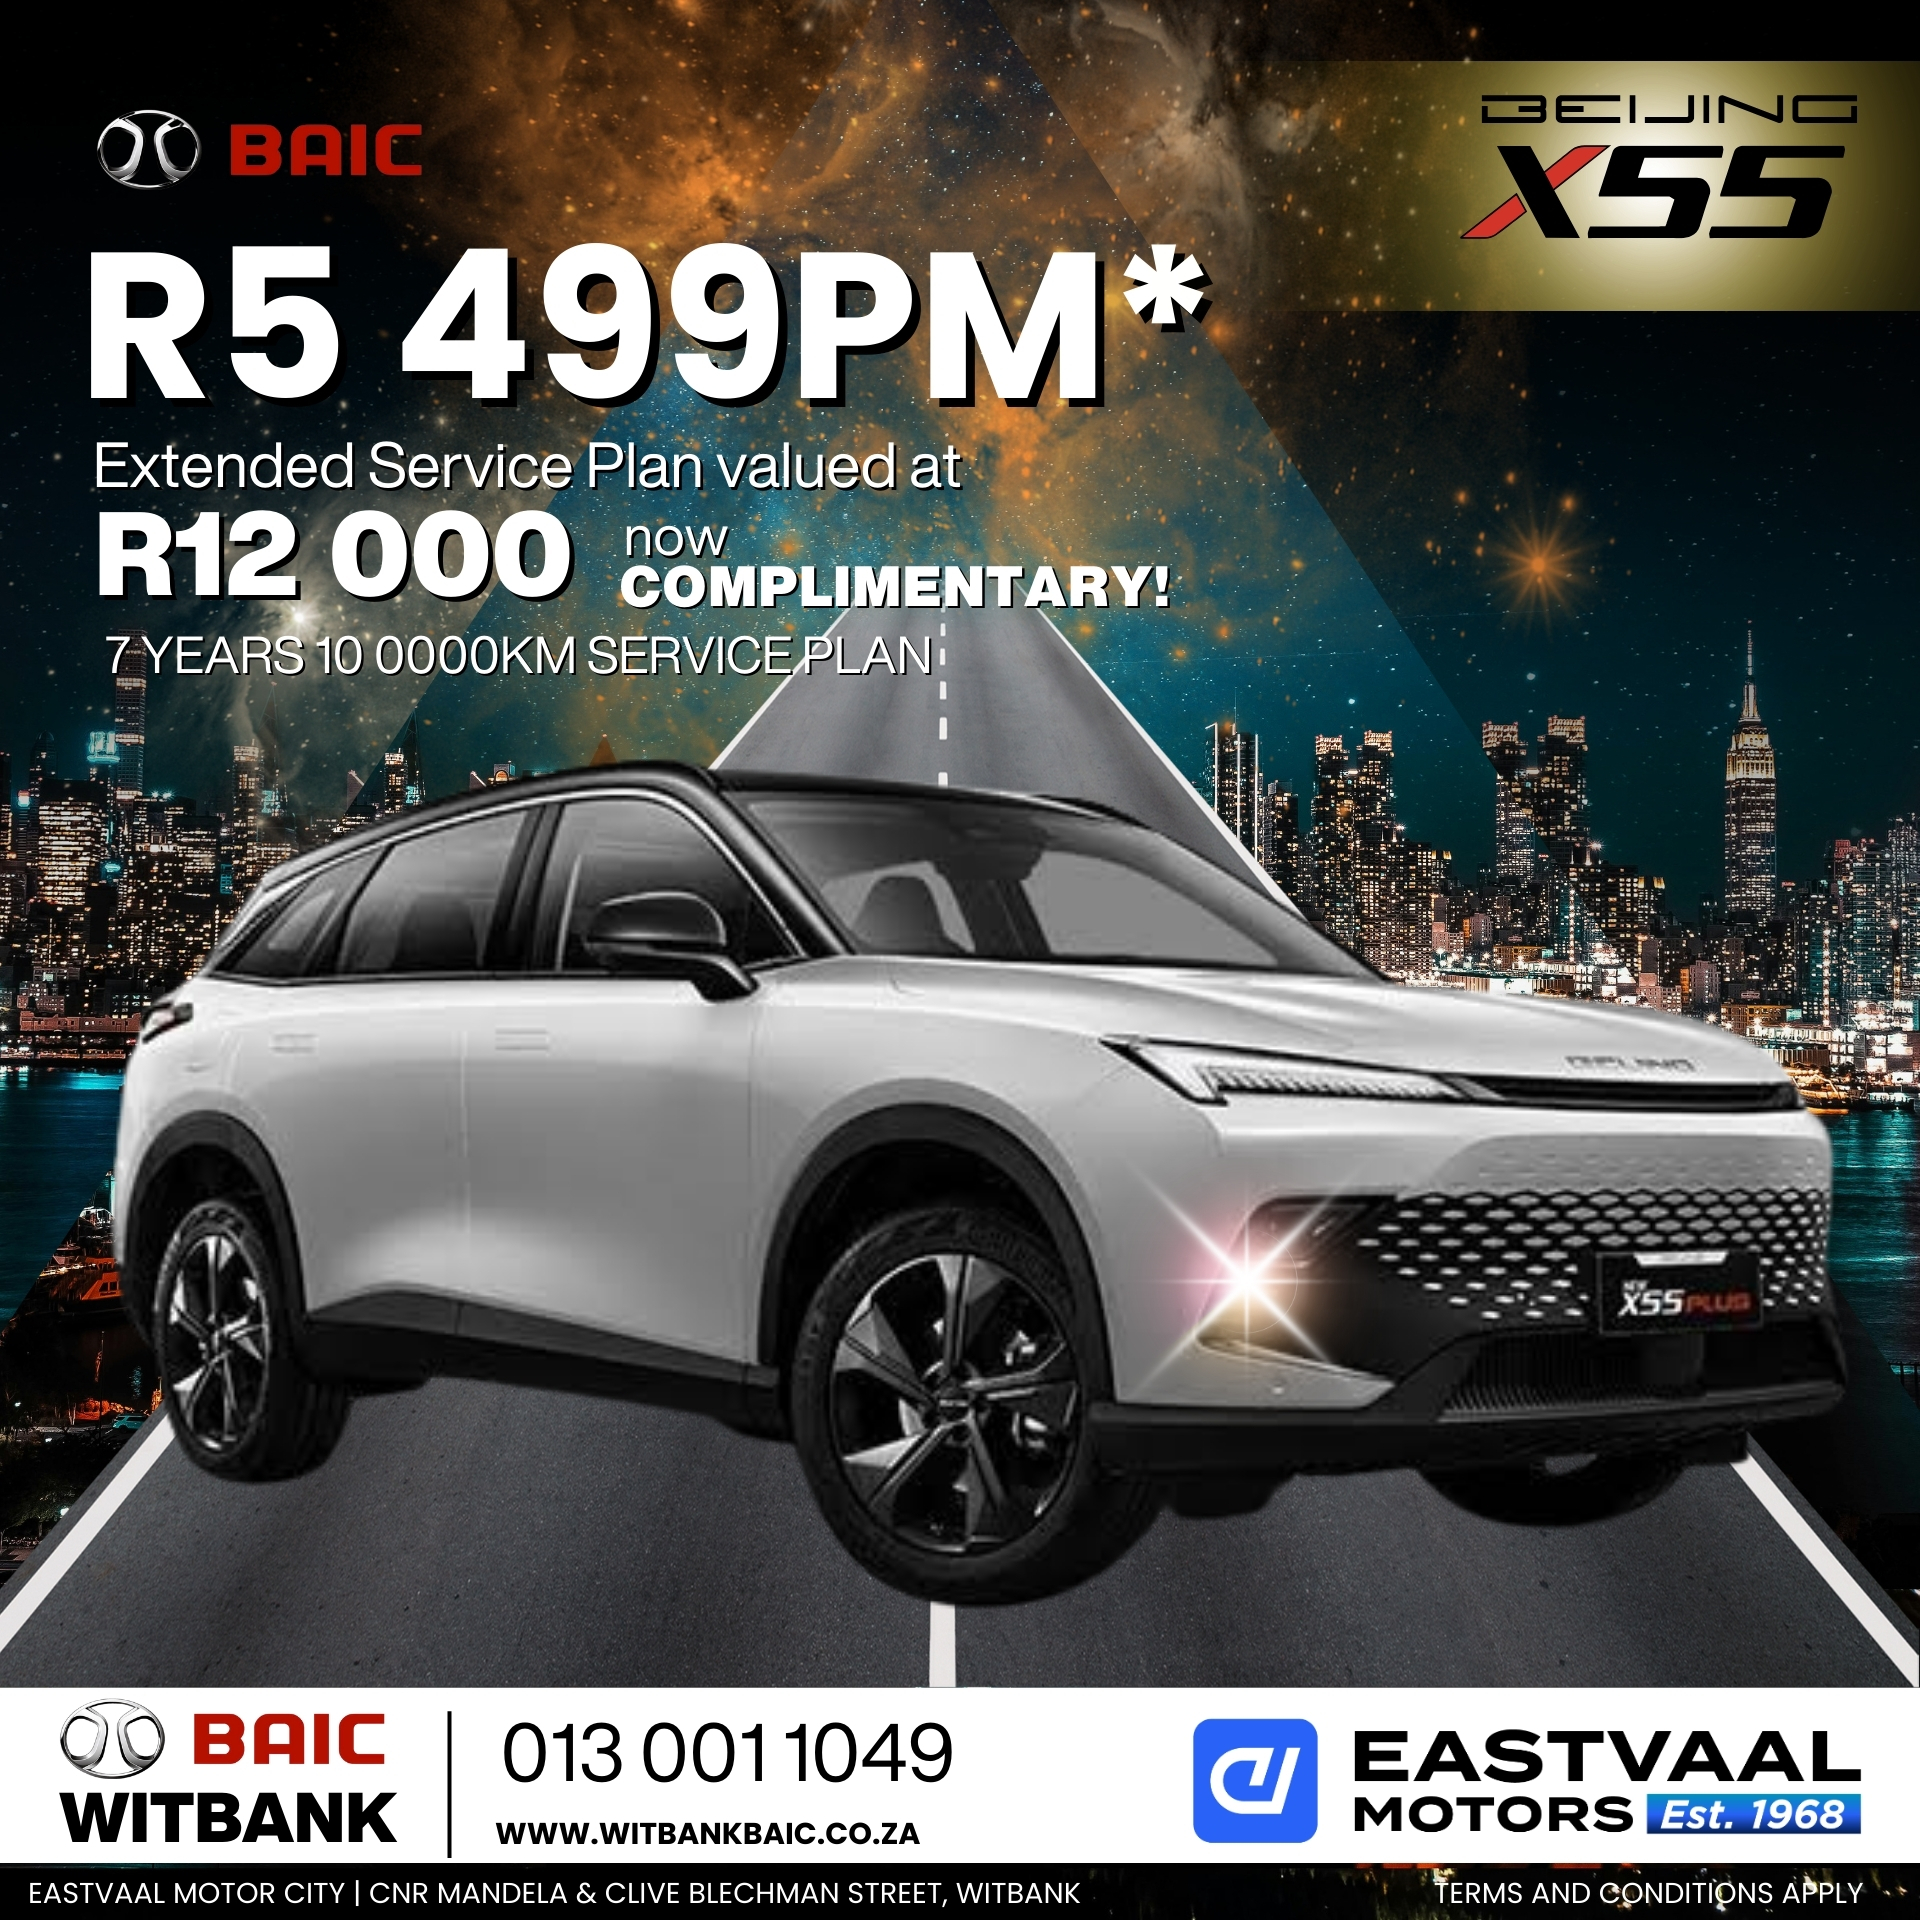 Drive into July with unbeatable deals on BAIC! Visit Eastvaal Motor City and discover your new ride. image from Eastvaal Motors